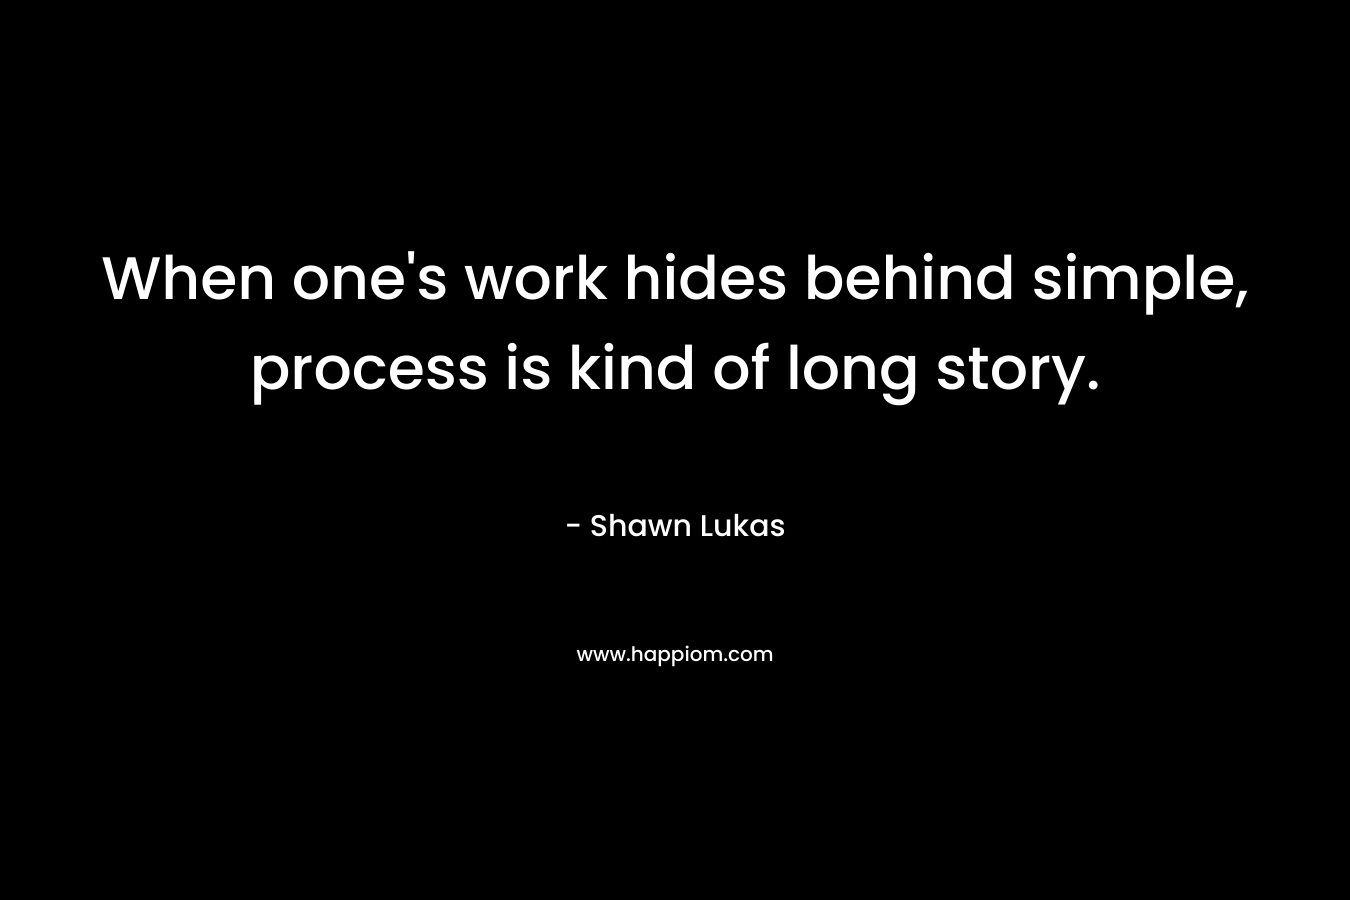 When one’s work hides behind simple, process is kind of long story. – Shawn Lukas